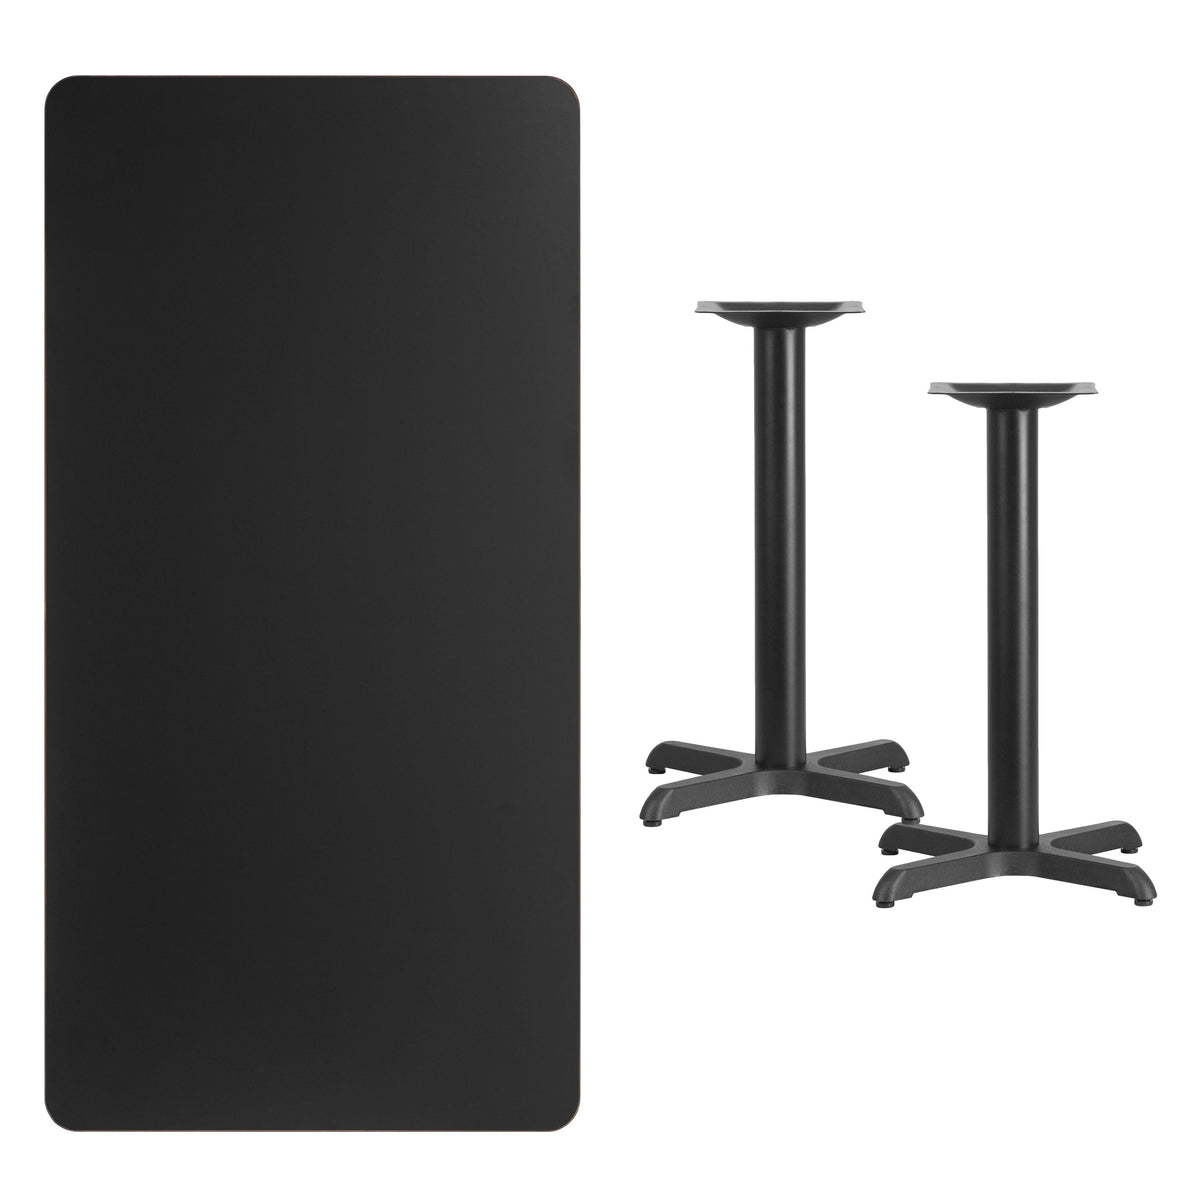 Black |#| 30inch x 60inch Rectangular Black Laminate Table Top & 22inch x 22inch Table Height Bases